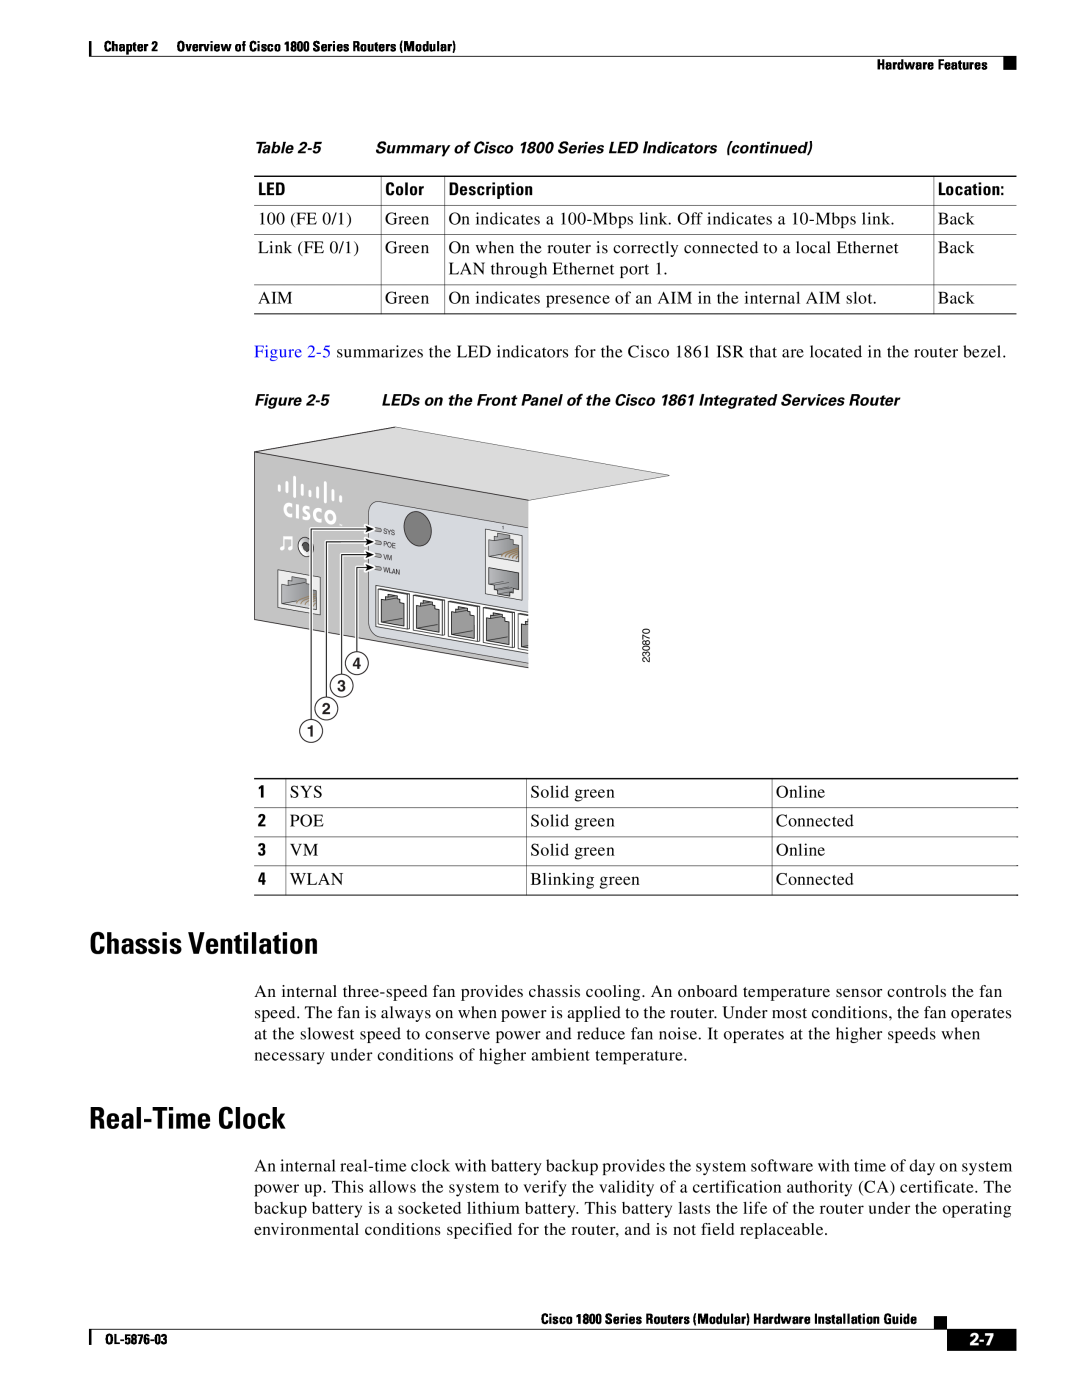 Cisco Systems CISCO1841-HSEC/K9-RF manual Chassis Ventilation, Real-Time Clock 